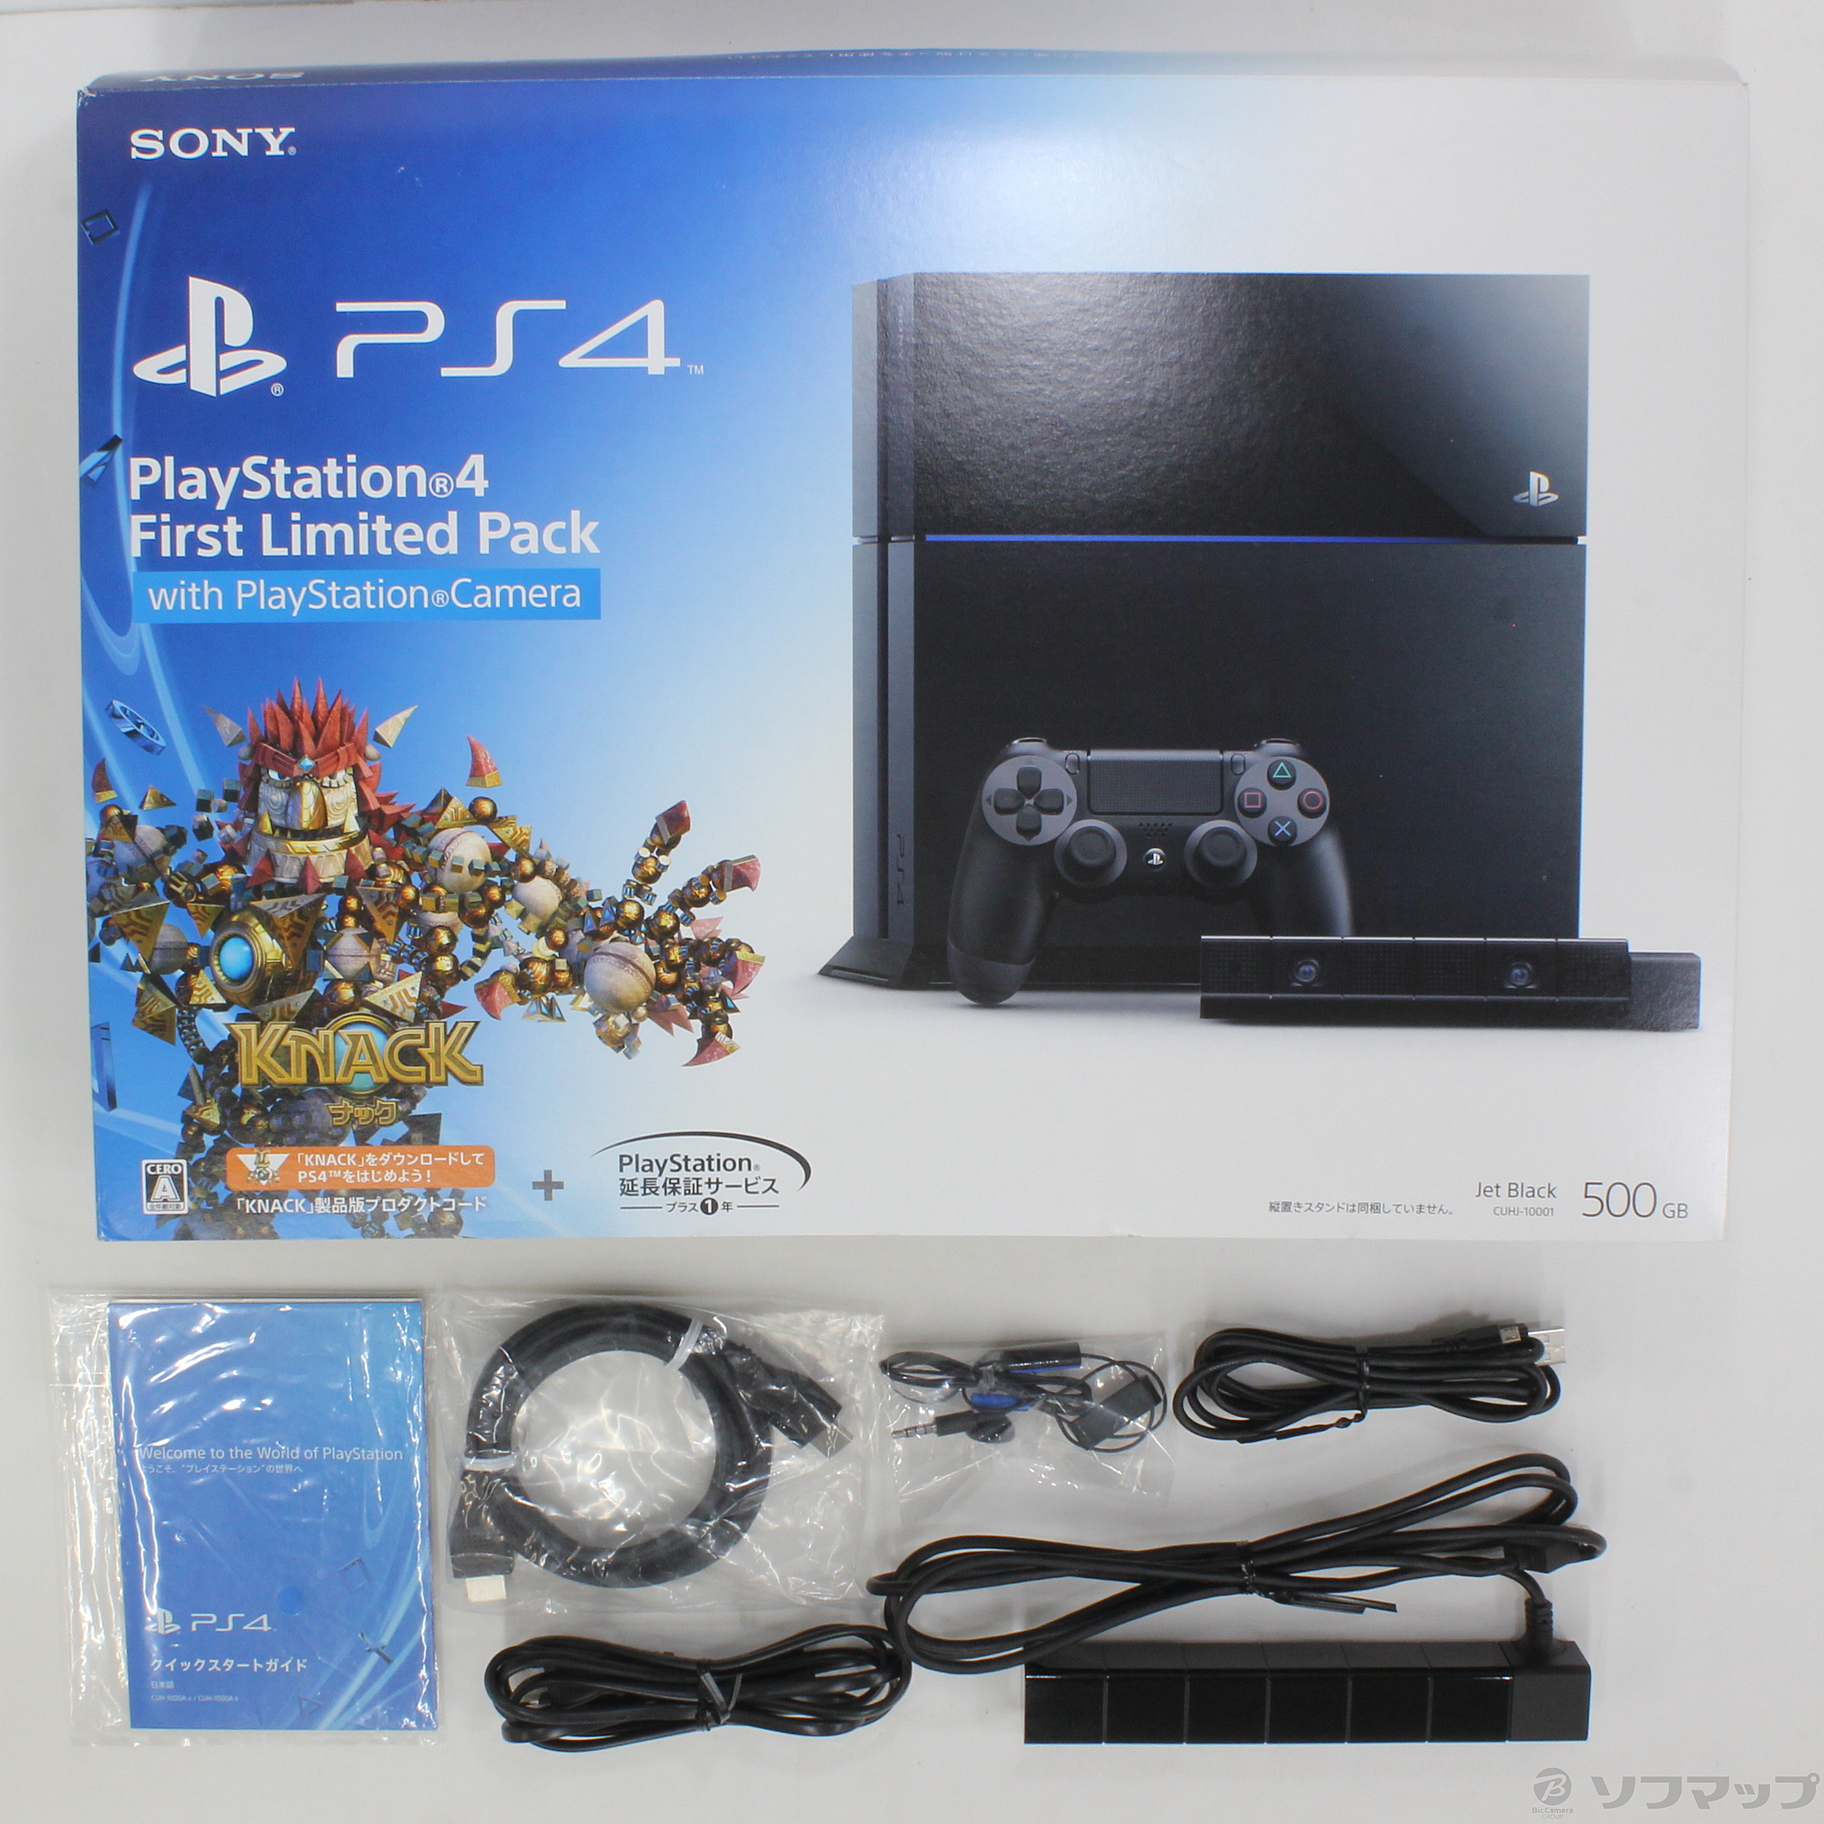 SONY PlayStation4 First Limited Pack